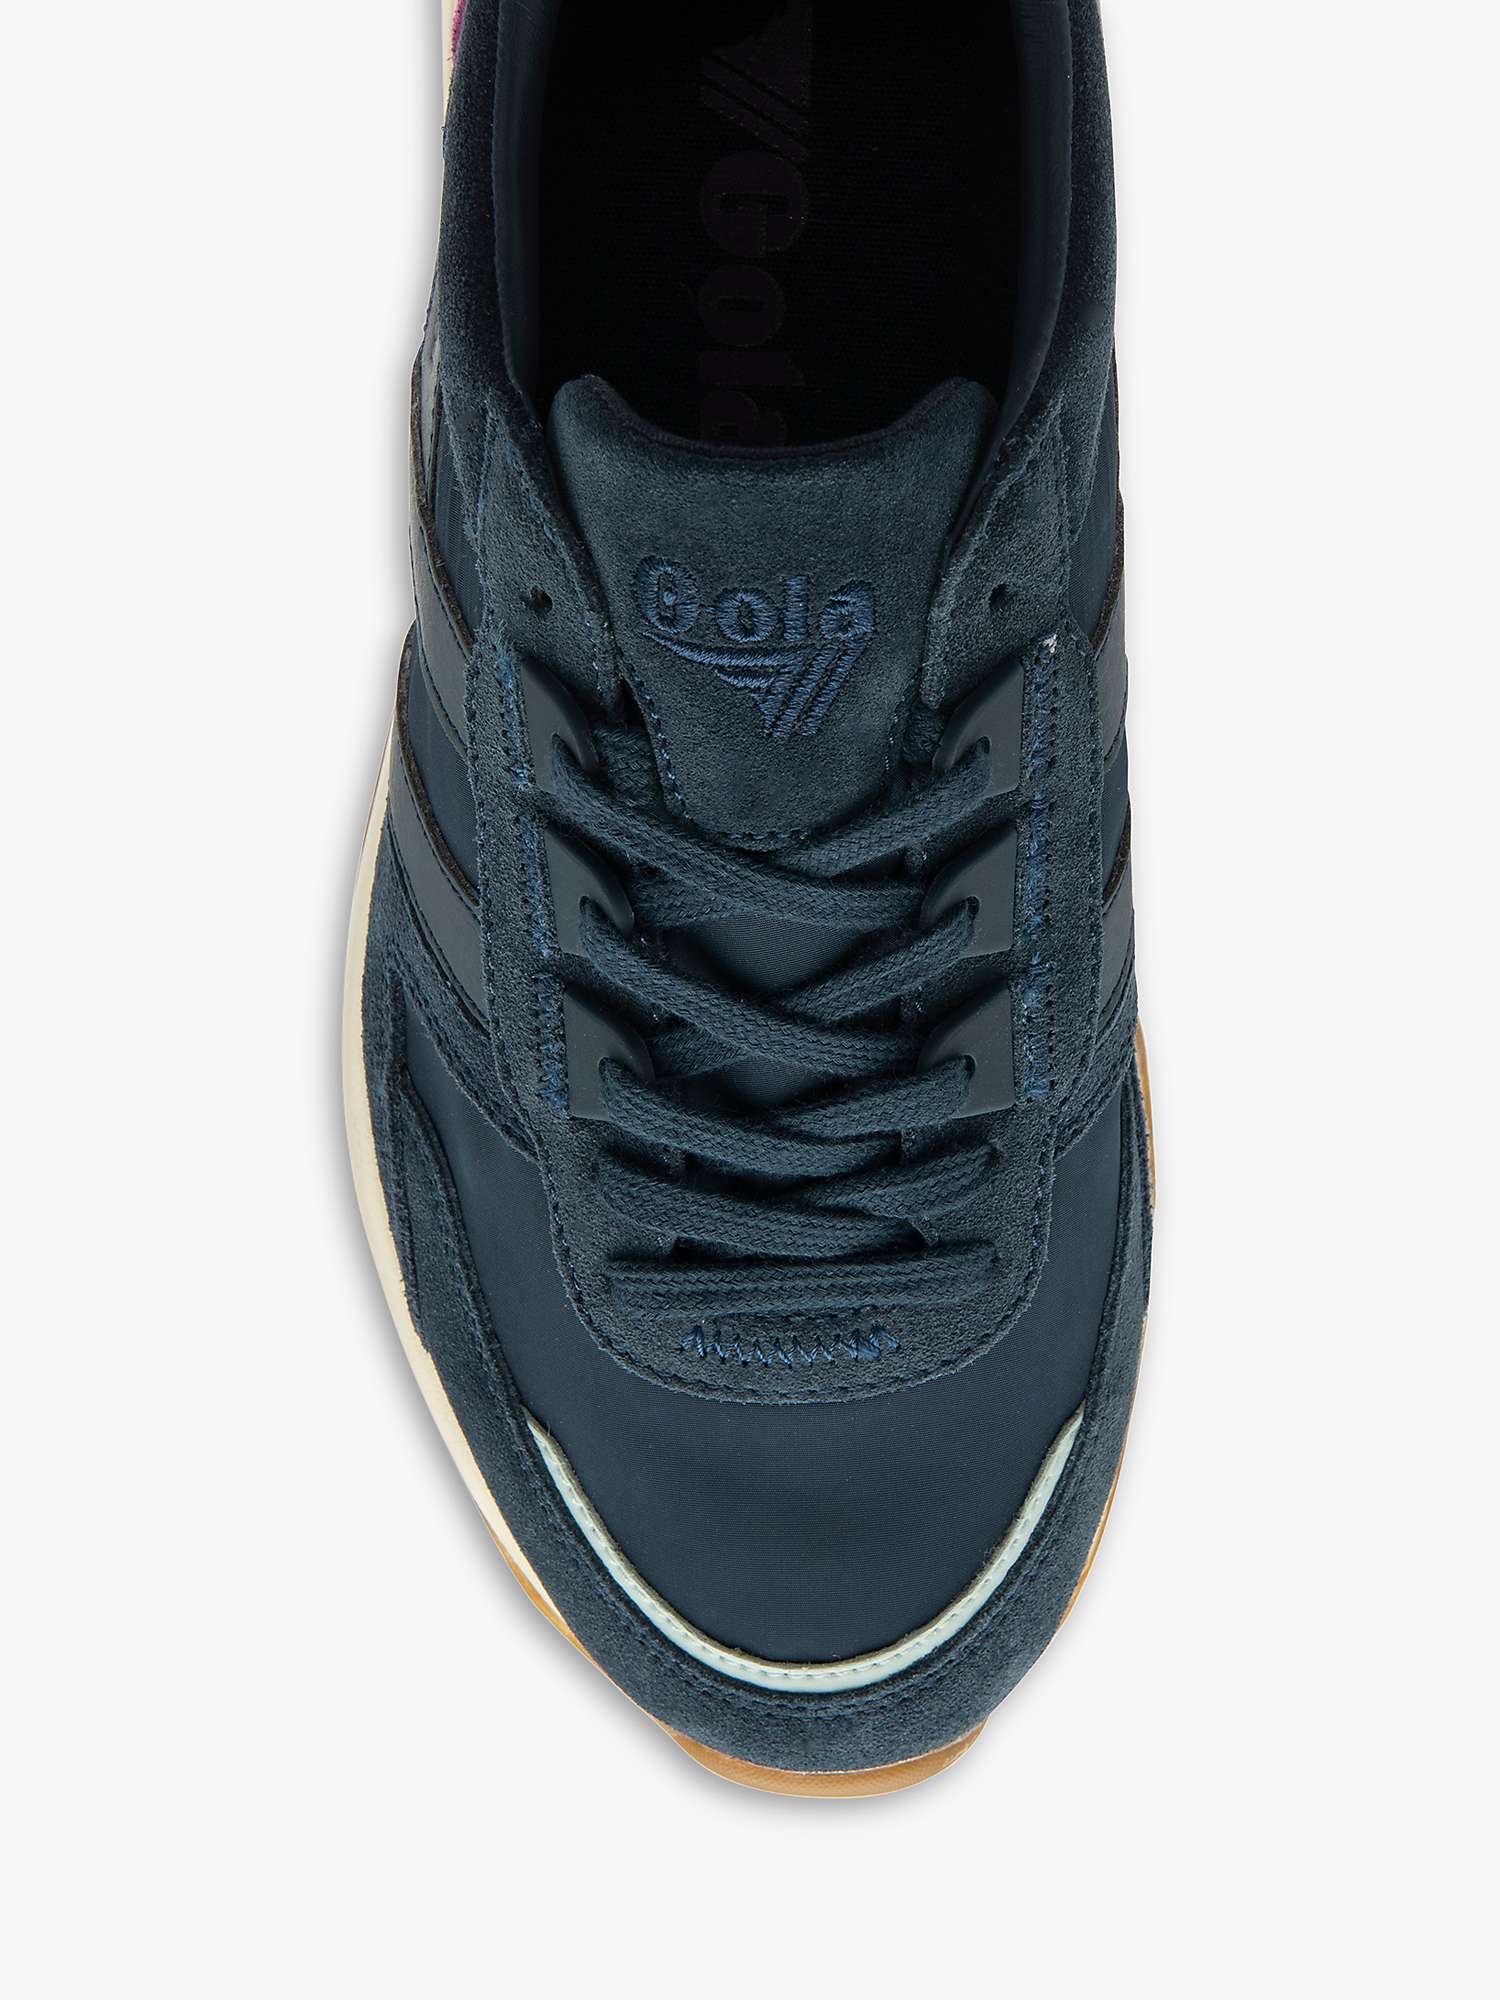 Buy Gola Classics Chicago Textile Trainers, Navy/Ice Blue Online at johnlewis.com